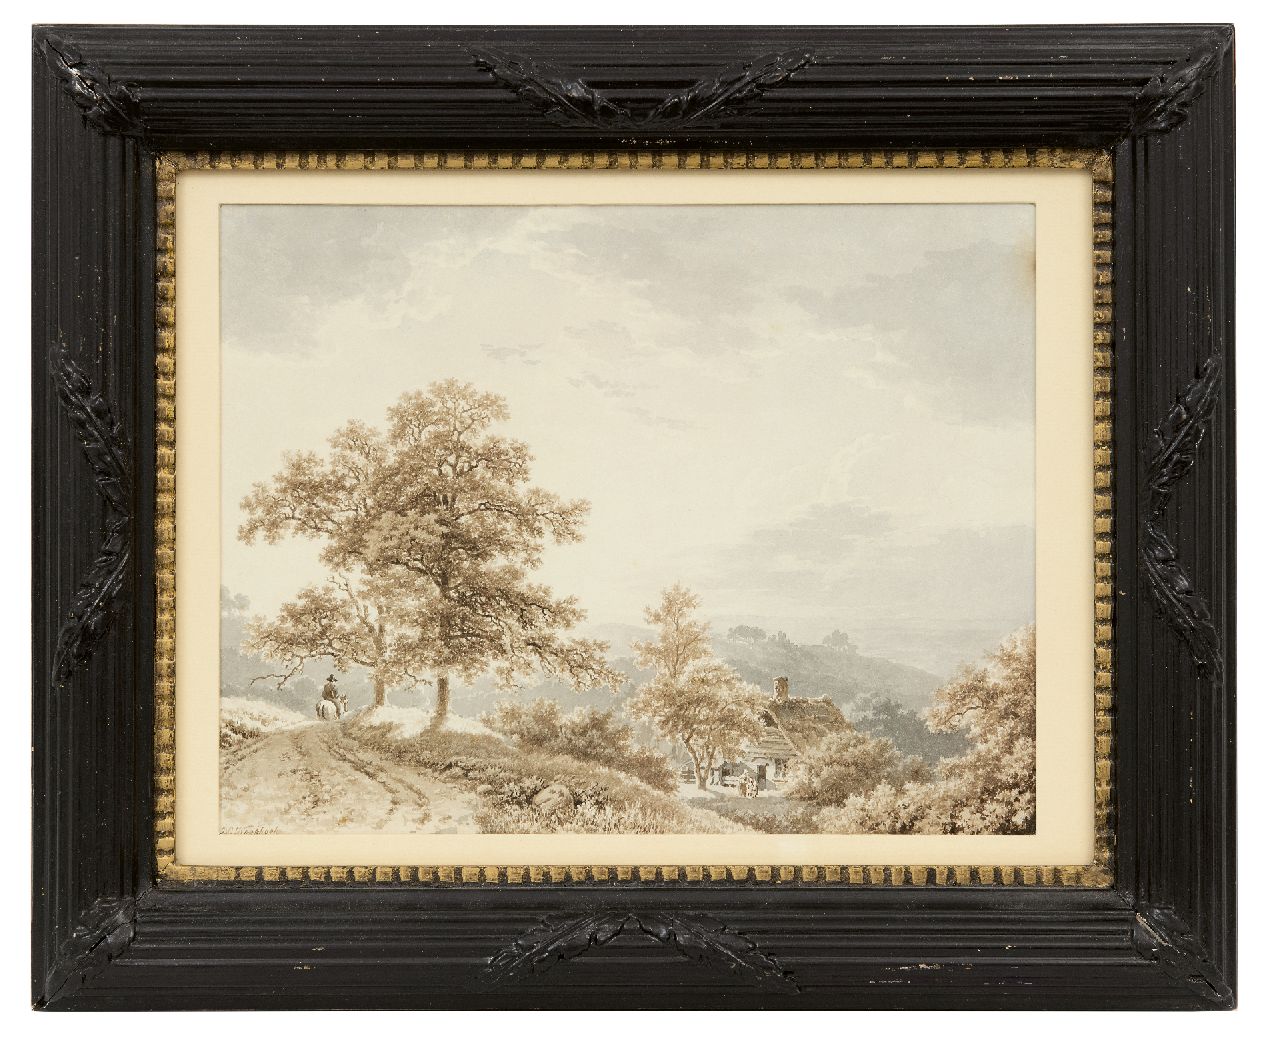 Koekkoek B.C.  | Barend Cornelis Koekkoek, Traveller in a hilly landscape, sepia and washed ink on paper 21.2 x 27.4 cm, signed l.l. and painted ca. 1833-1840